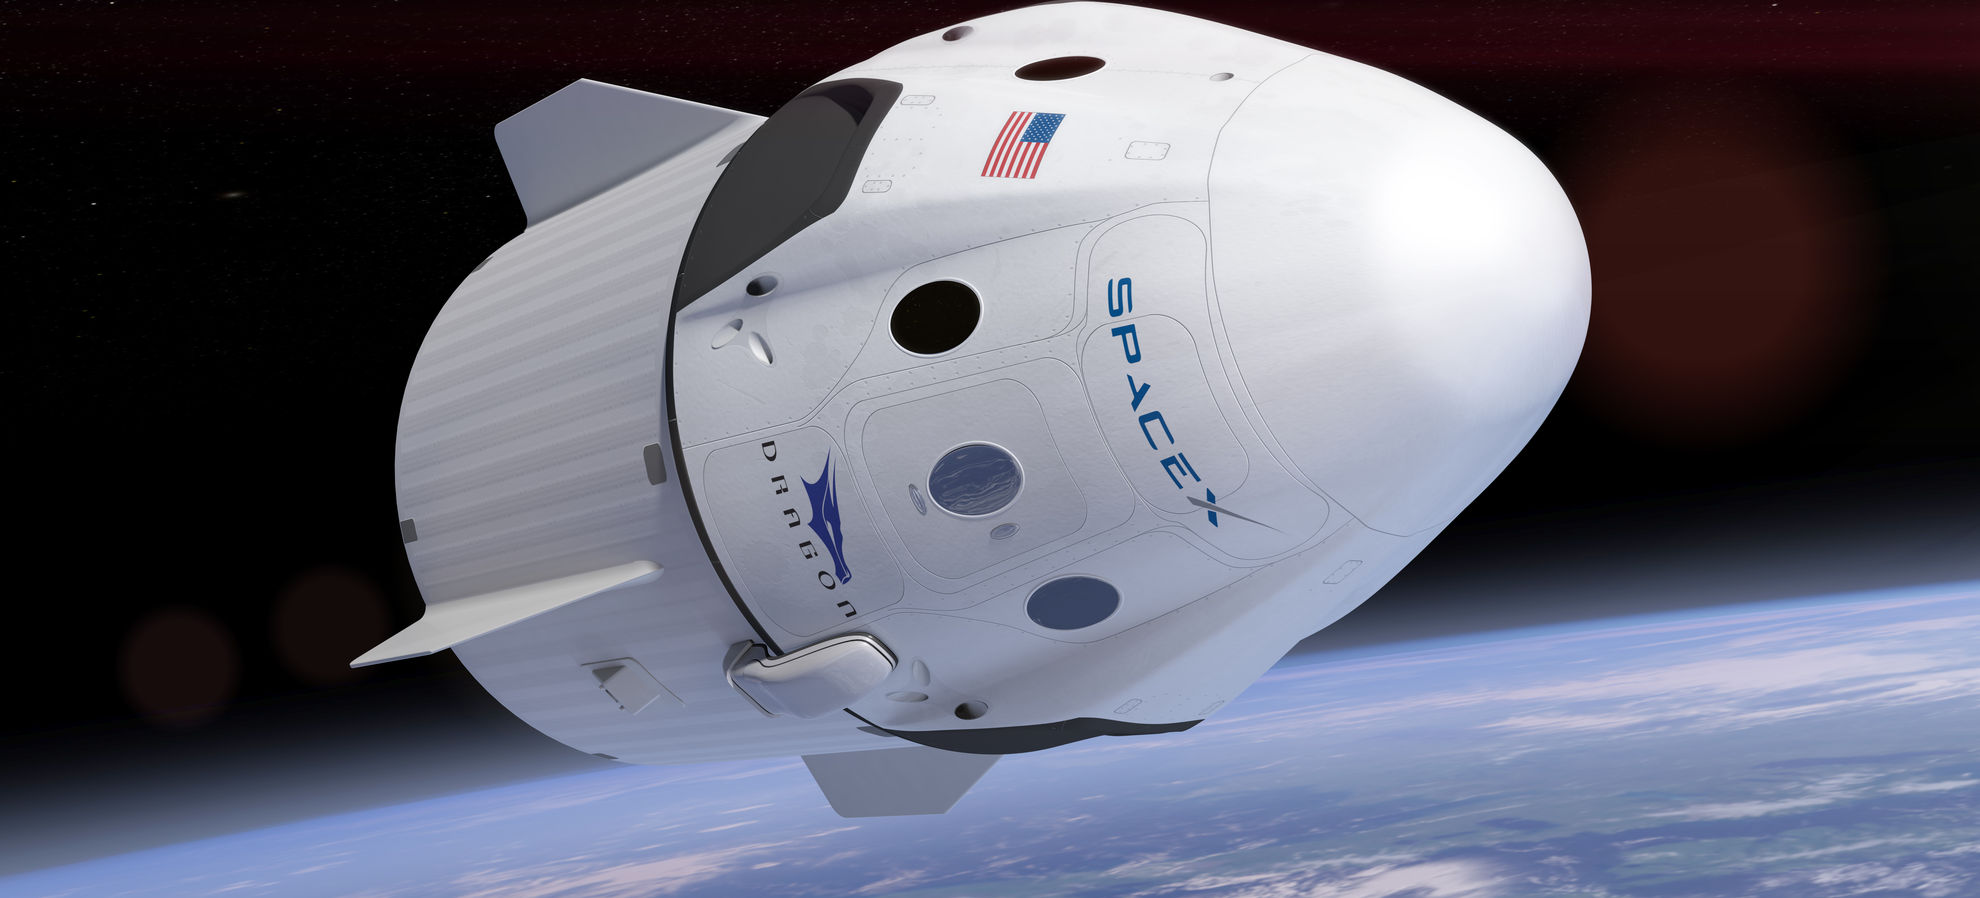 Elon Musk Announces Daring SpaceX Dragon Flight Beyond Moon with 2 Private Astronauts ...1980 x 898